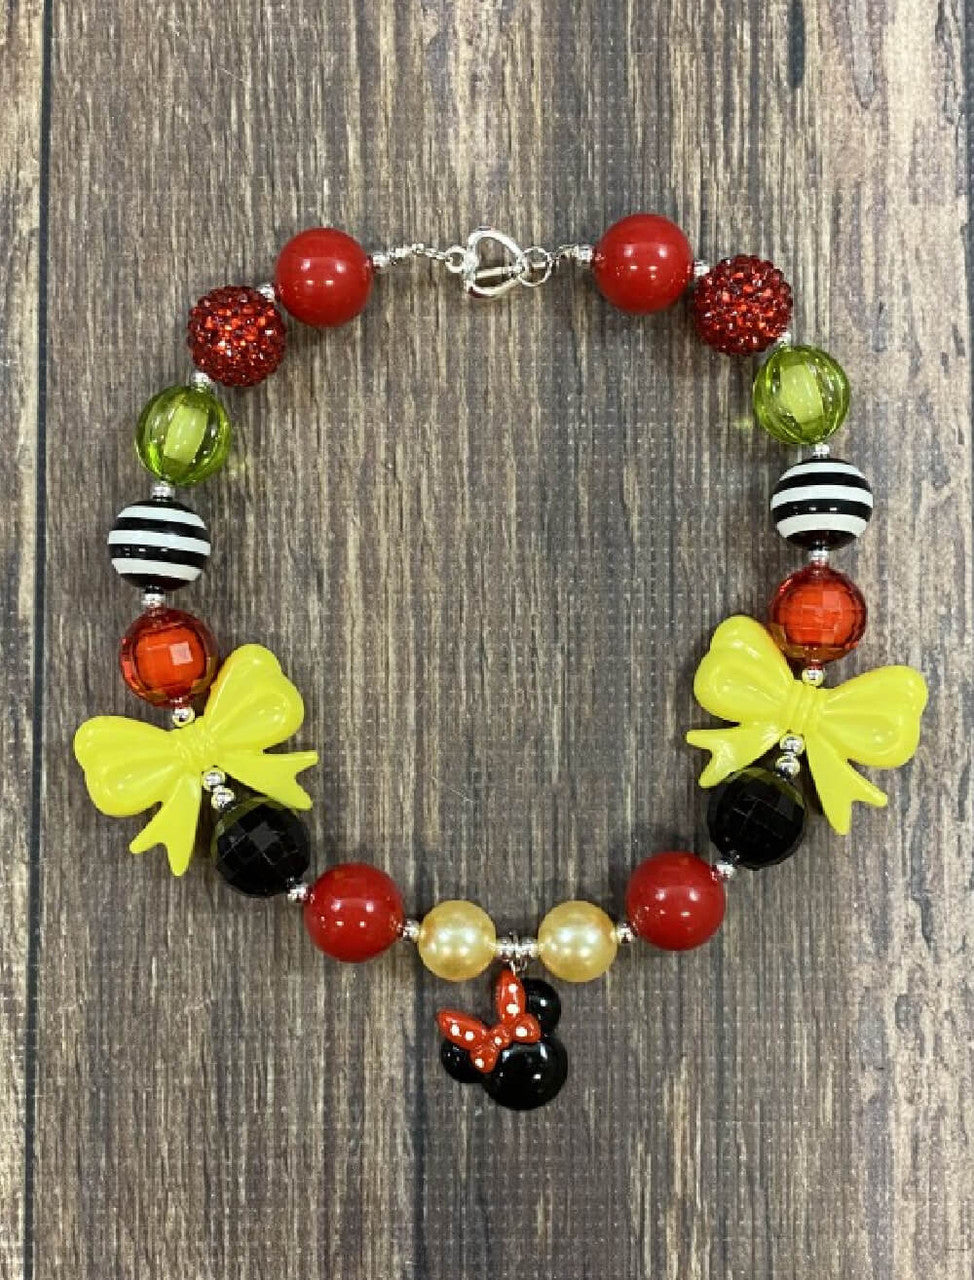 Minnie Mouse necklace in red, black, and yellow.